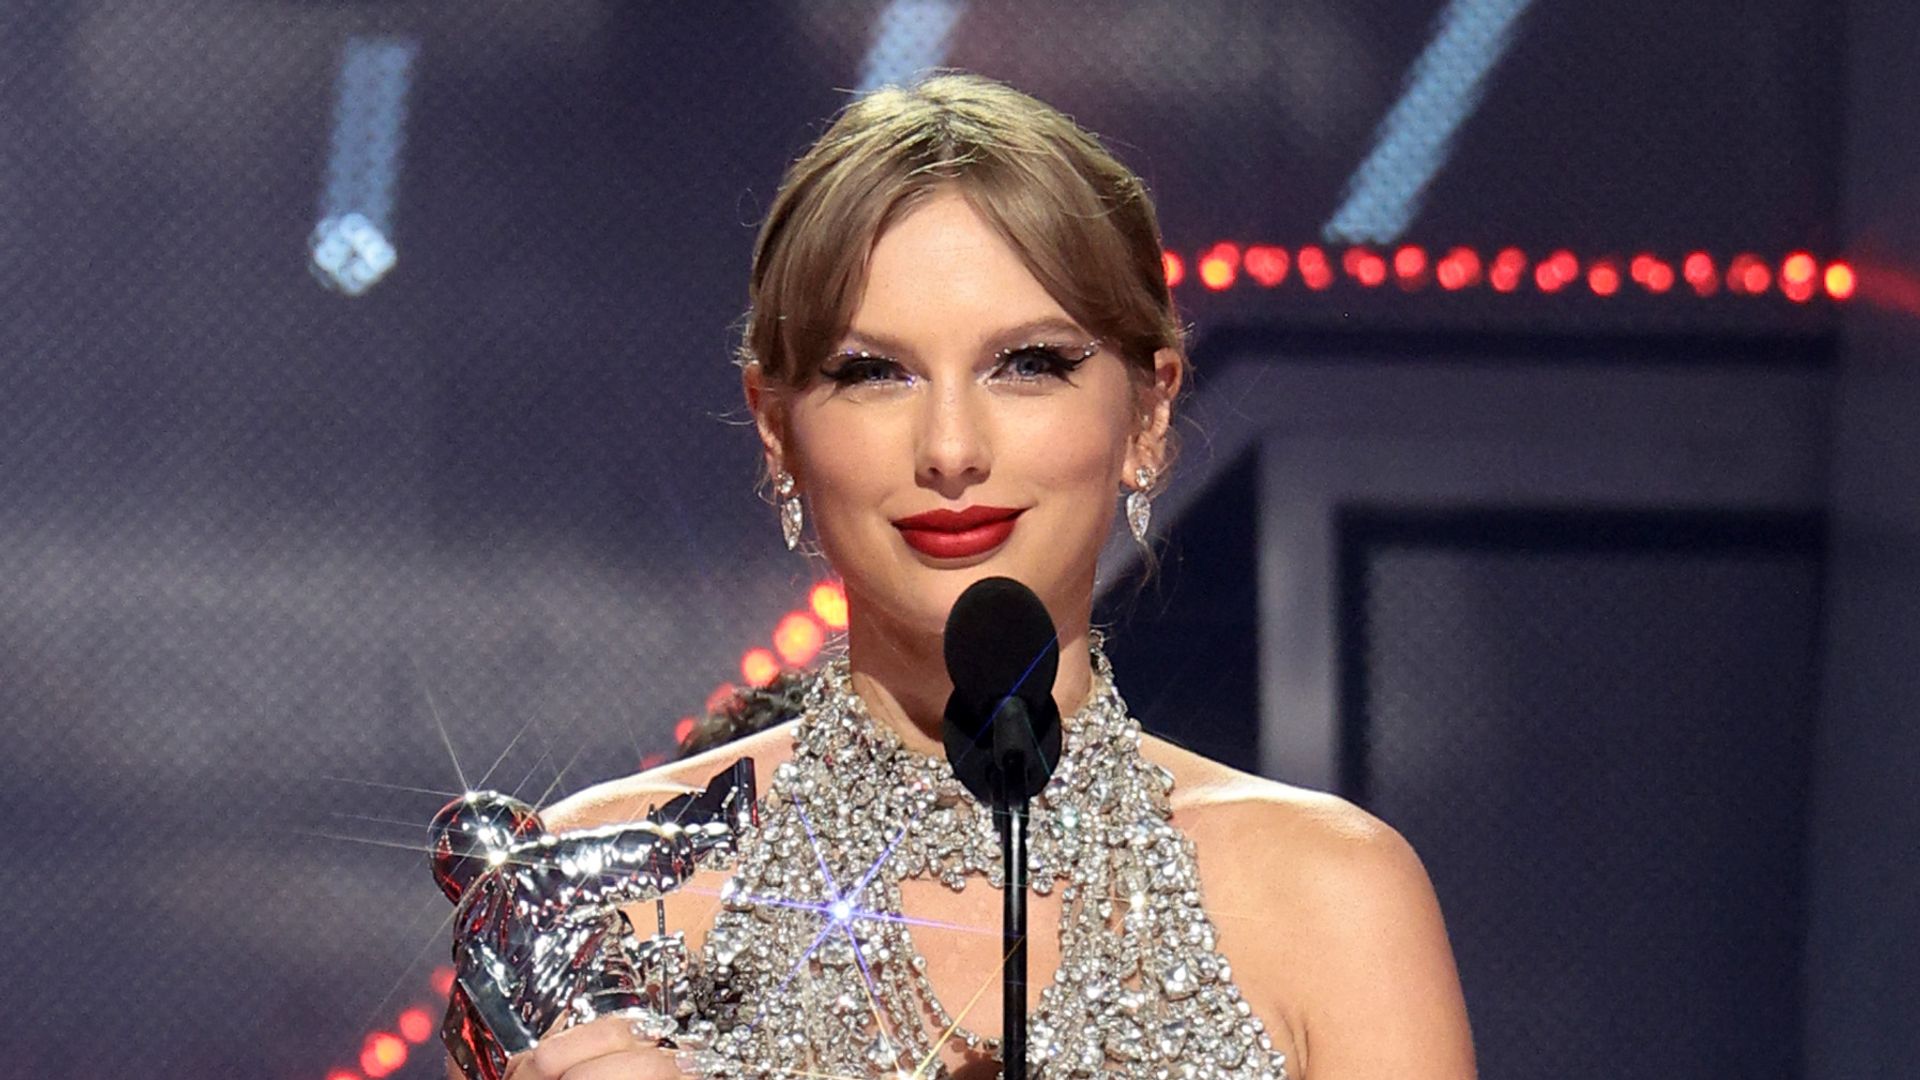 Taylor Swift accepts the Video of the Year award onstage at the 2022 MTV VMAs at Prudential Center on August 28, 2022 in Newark, New Jersey